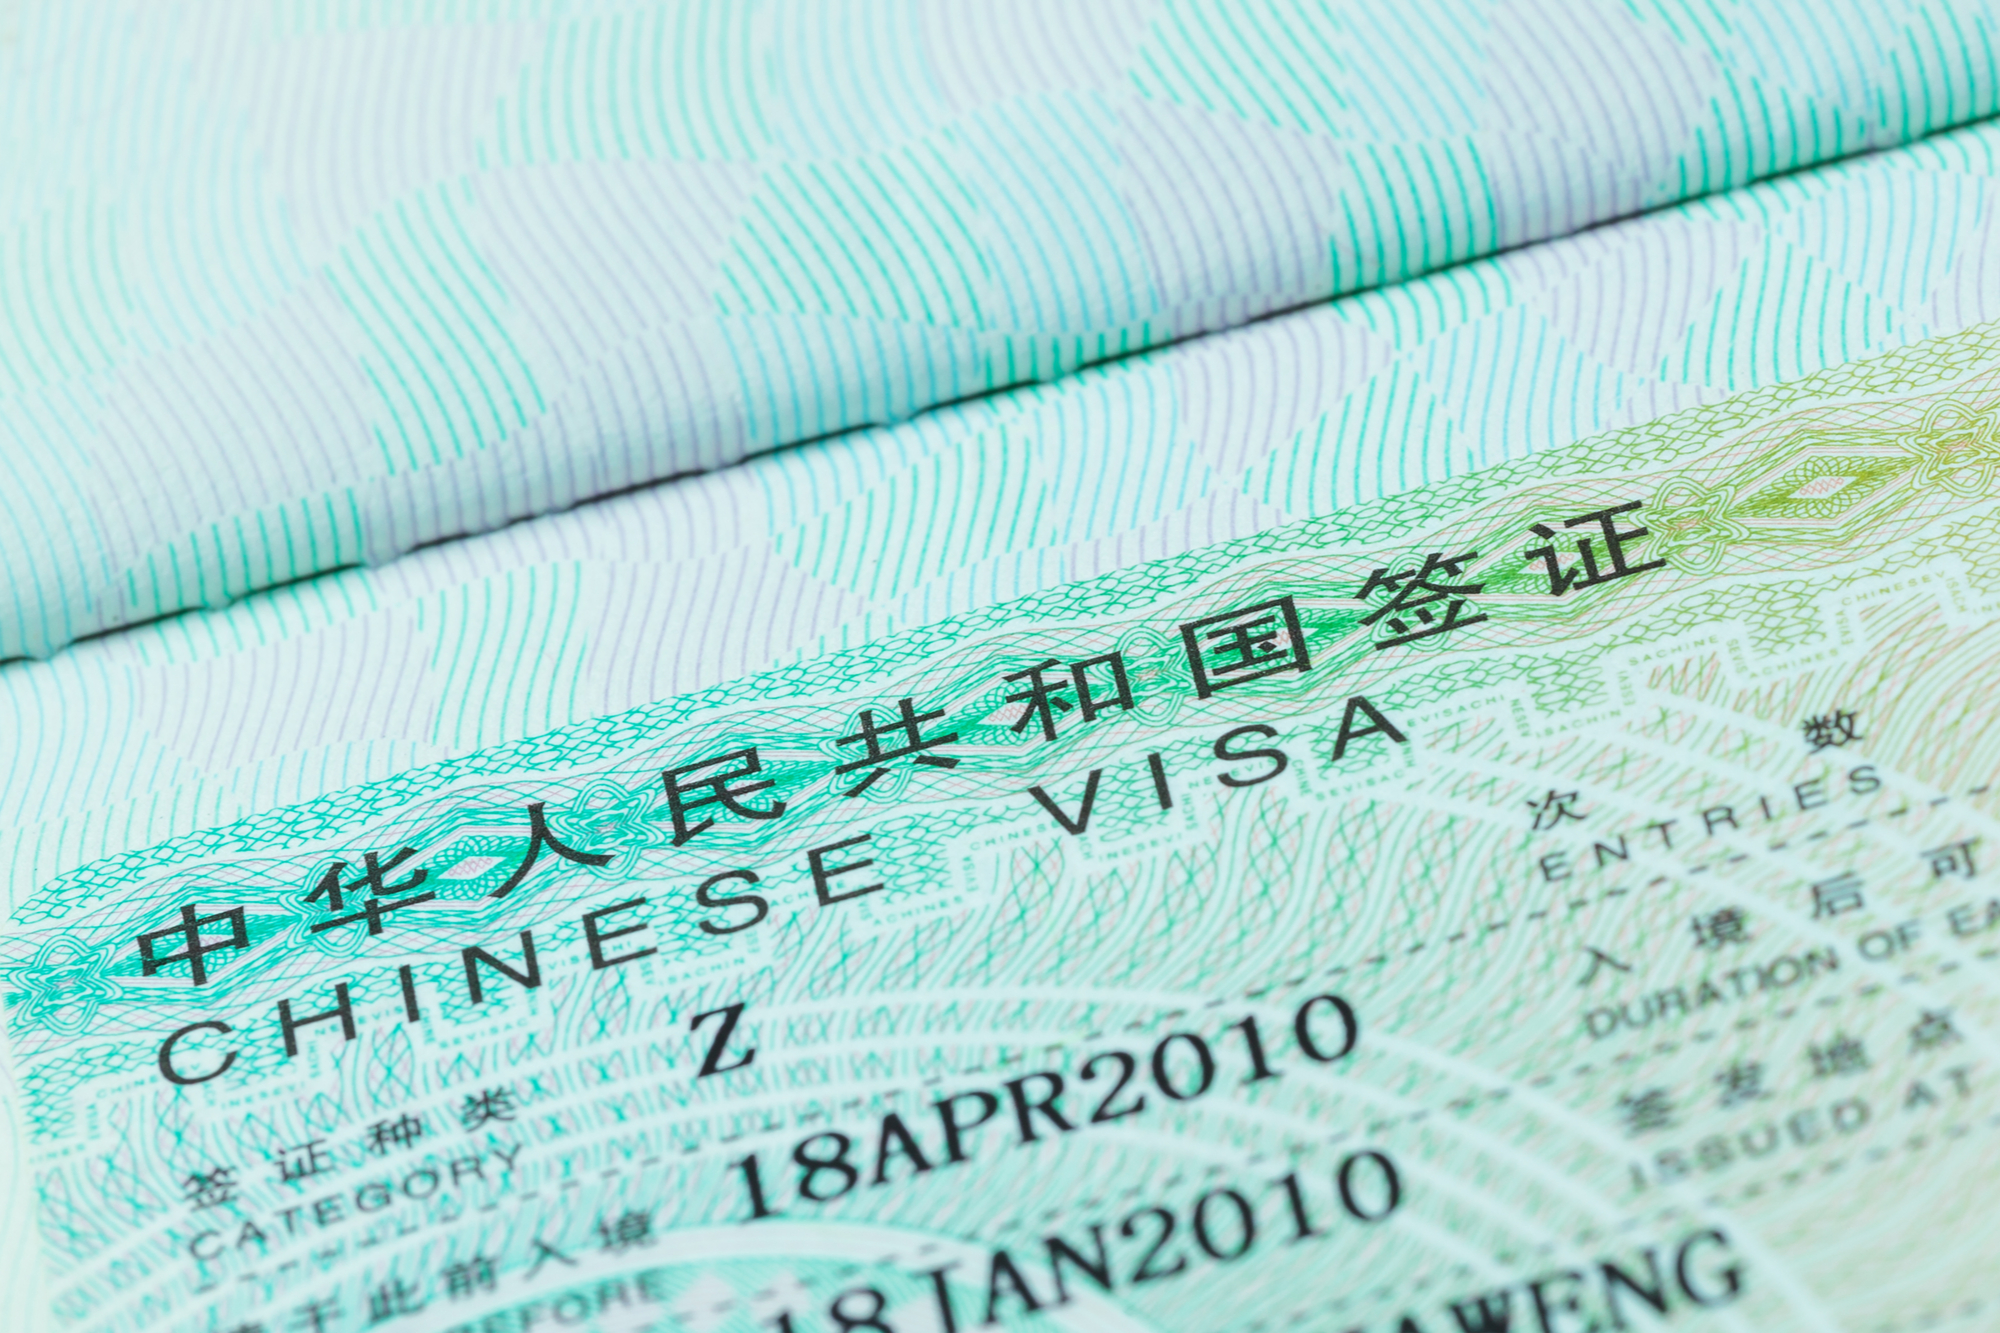 How to Get a Chinese Work Visa from the Chicago Chinese Consulate